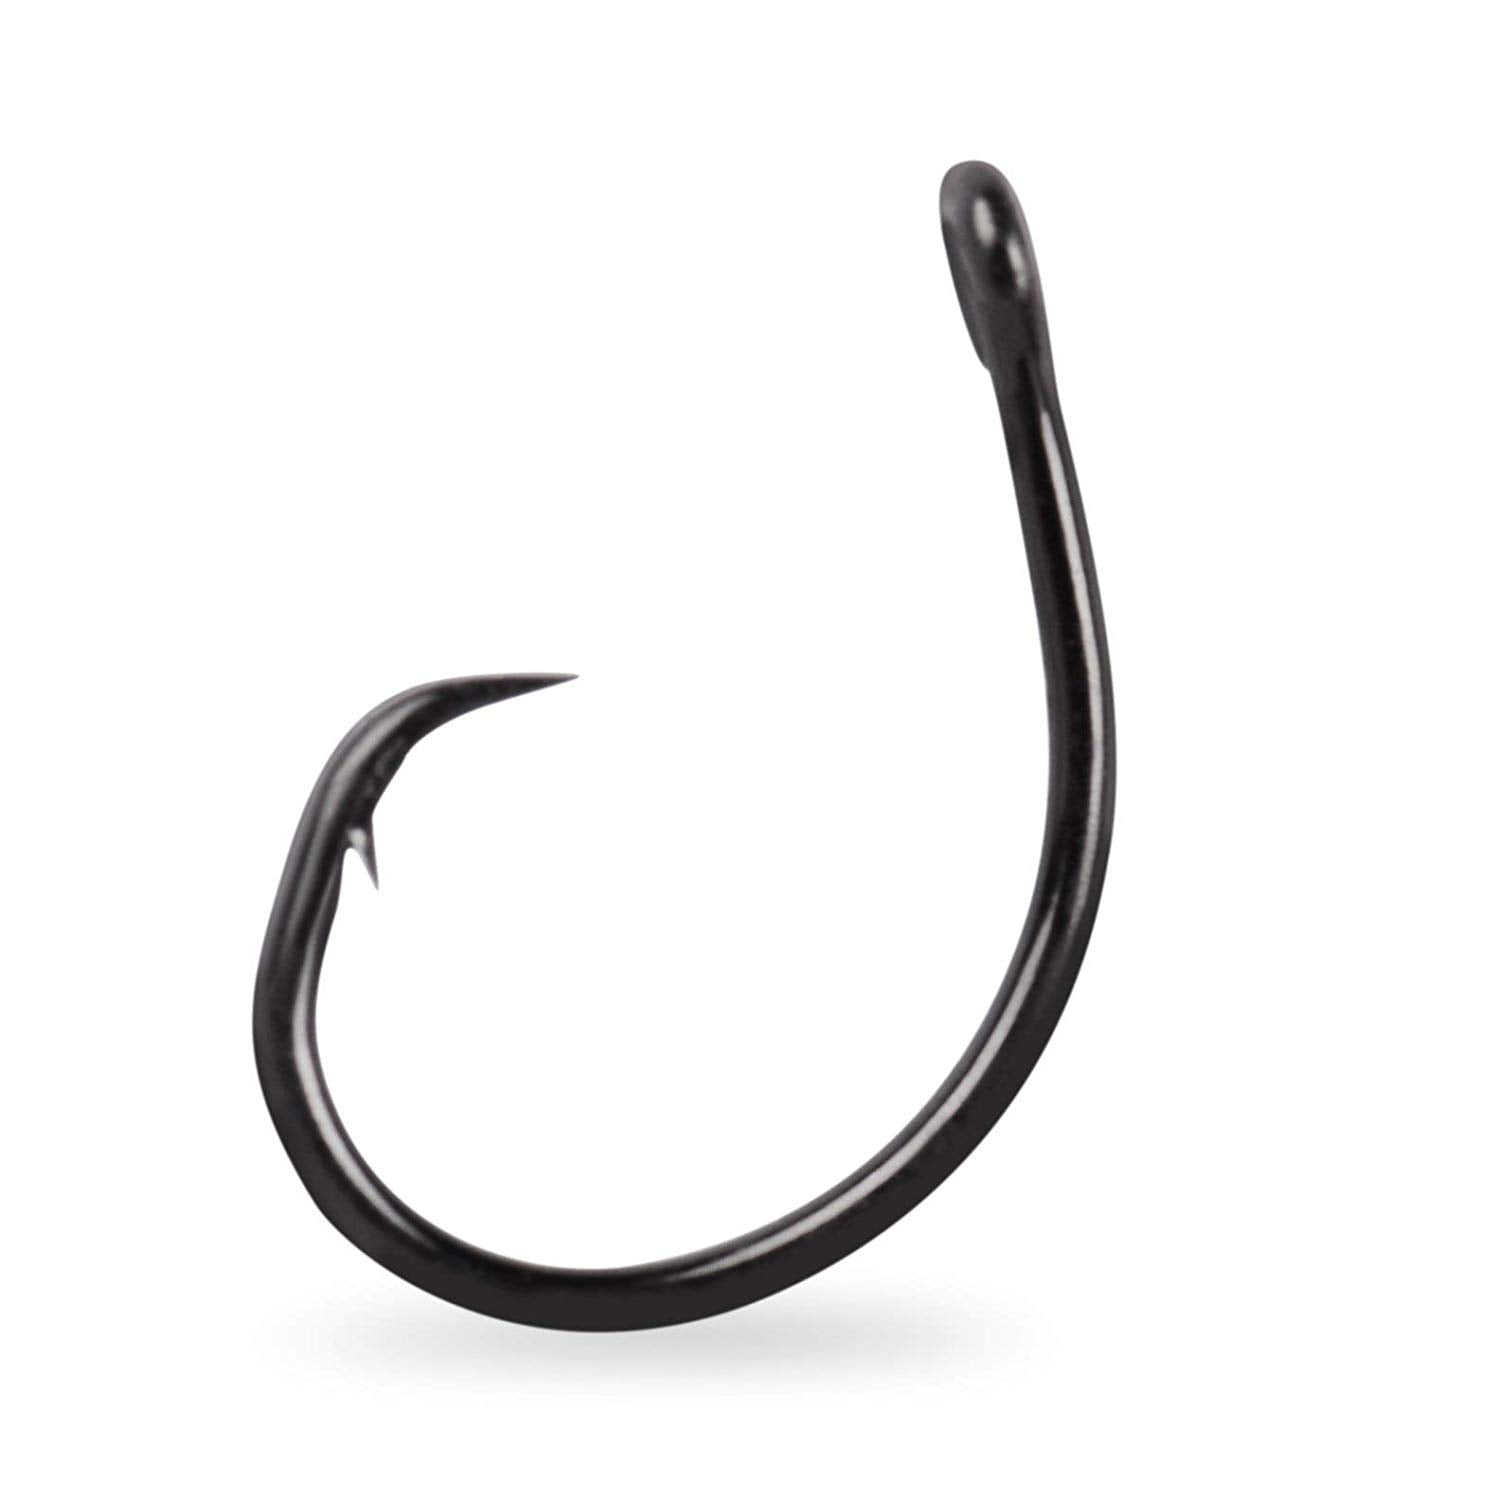 MUSTAD BLACK 14/0 HOOKS-8 COUNT-NUMBER 3135-HEAVY DUTY-KIRBY-4.5 INCHES LONG 